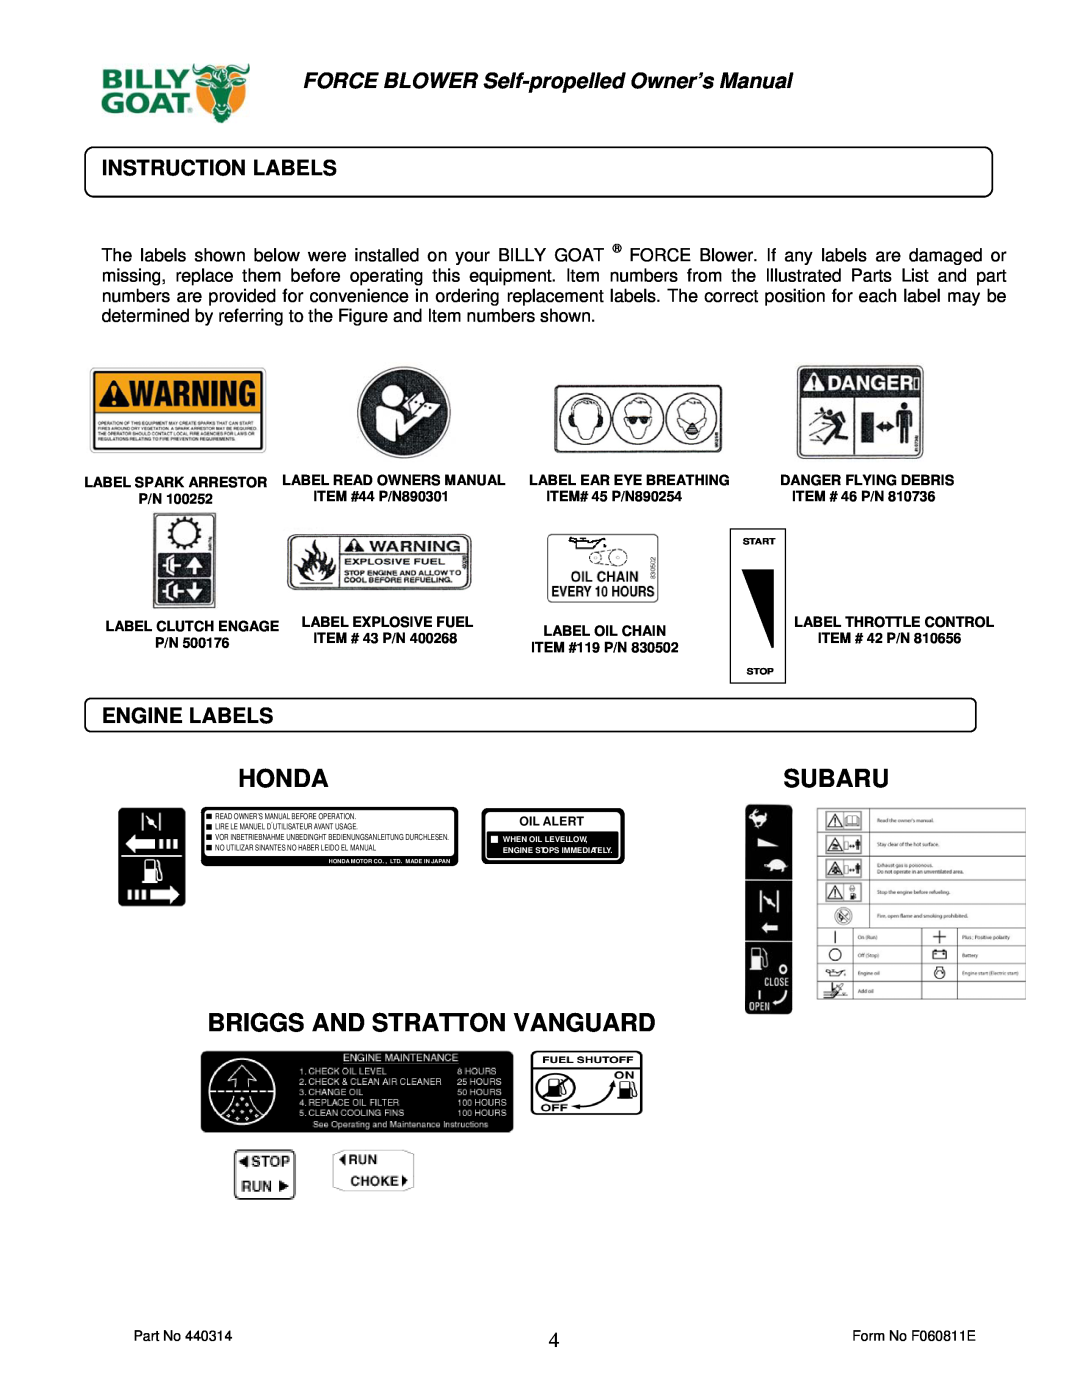 Billy Goat F902SPS, F902SPH, F1302SPH Honda, Subaru, Briggs And Stratton Vanguard, Instruction Labels, Engine Labels 